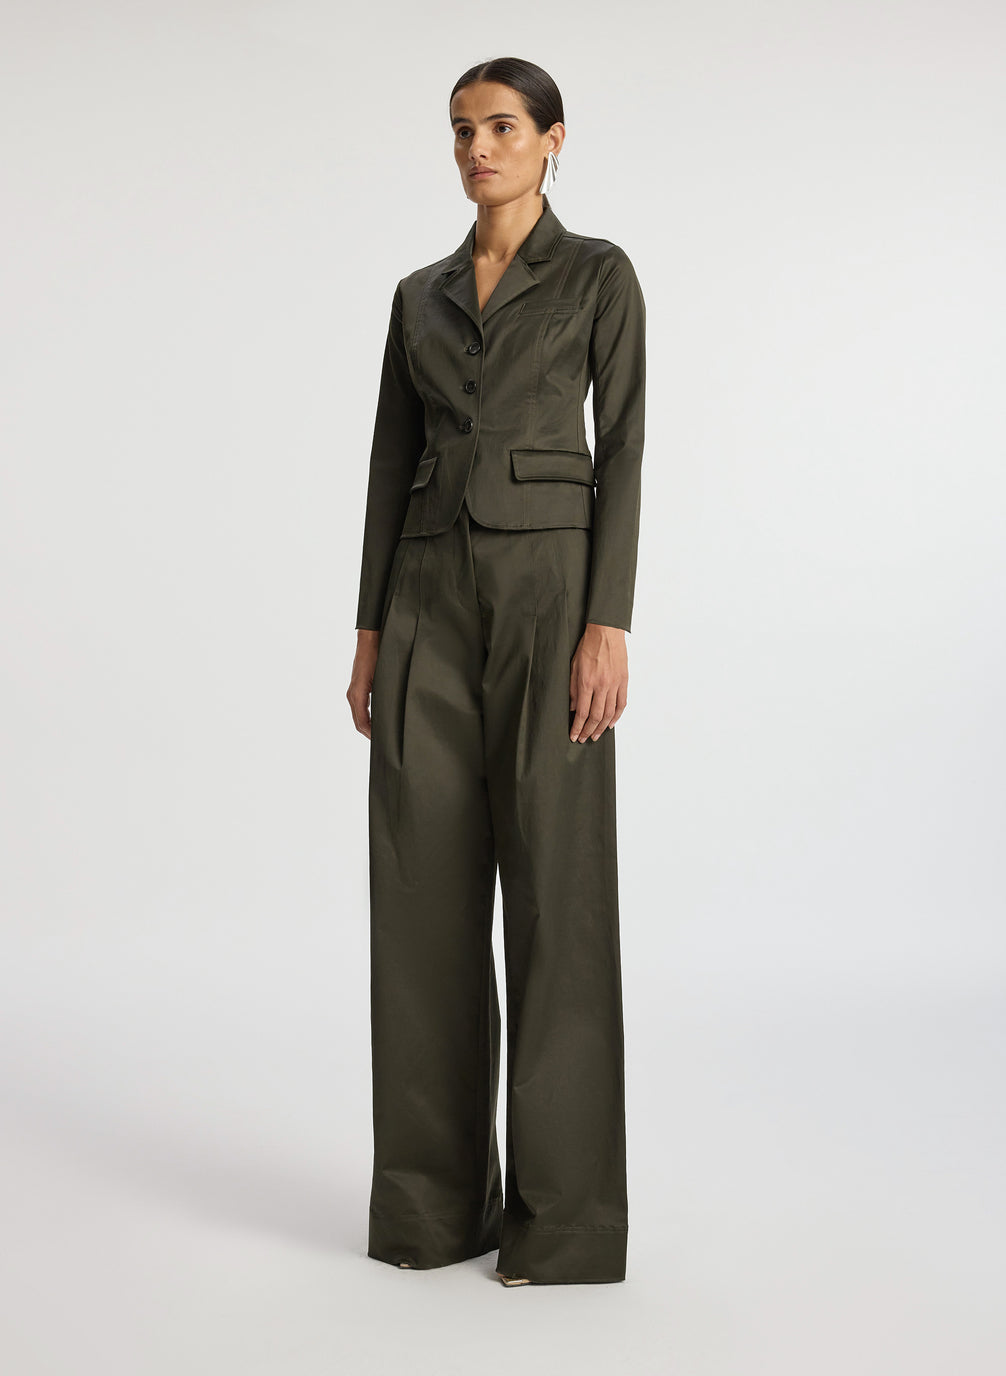 side view of woman in olive green sateen suit jacket and wide leg pants